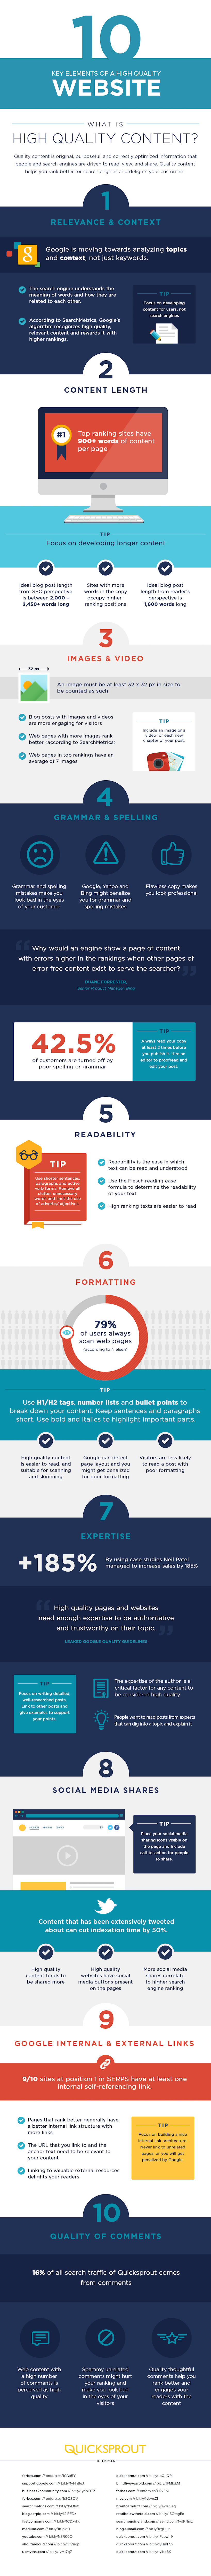 The 10 Key Elements of a High Quality Website